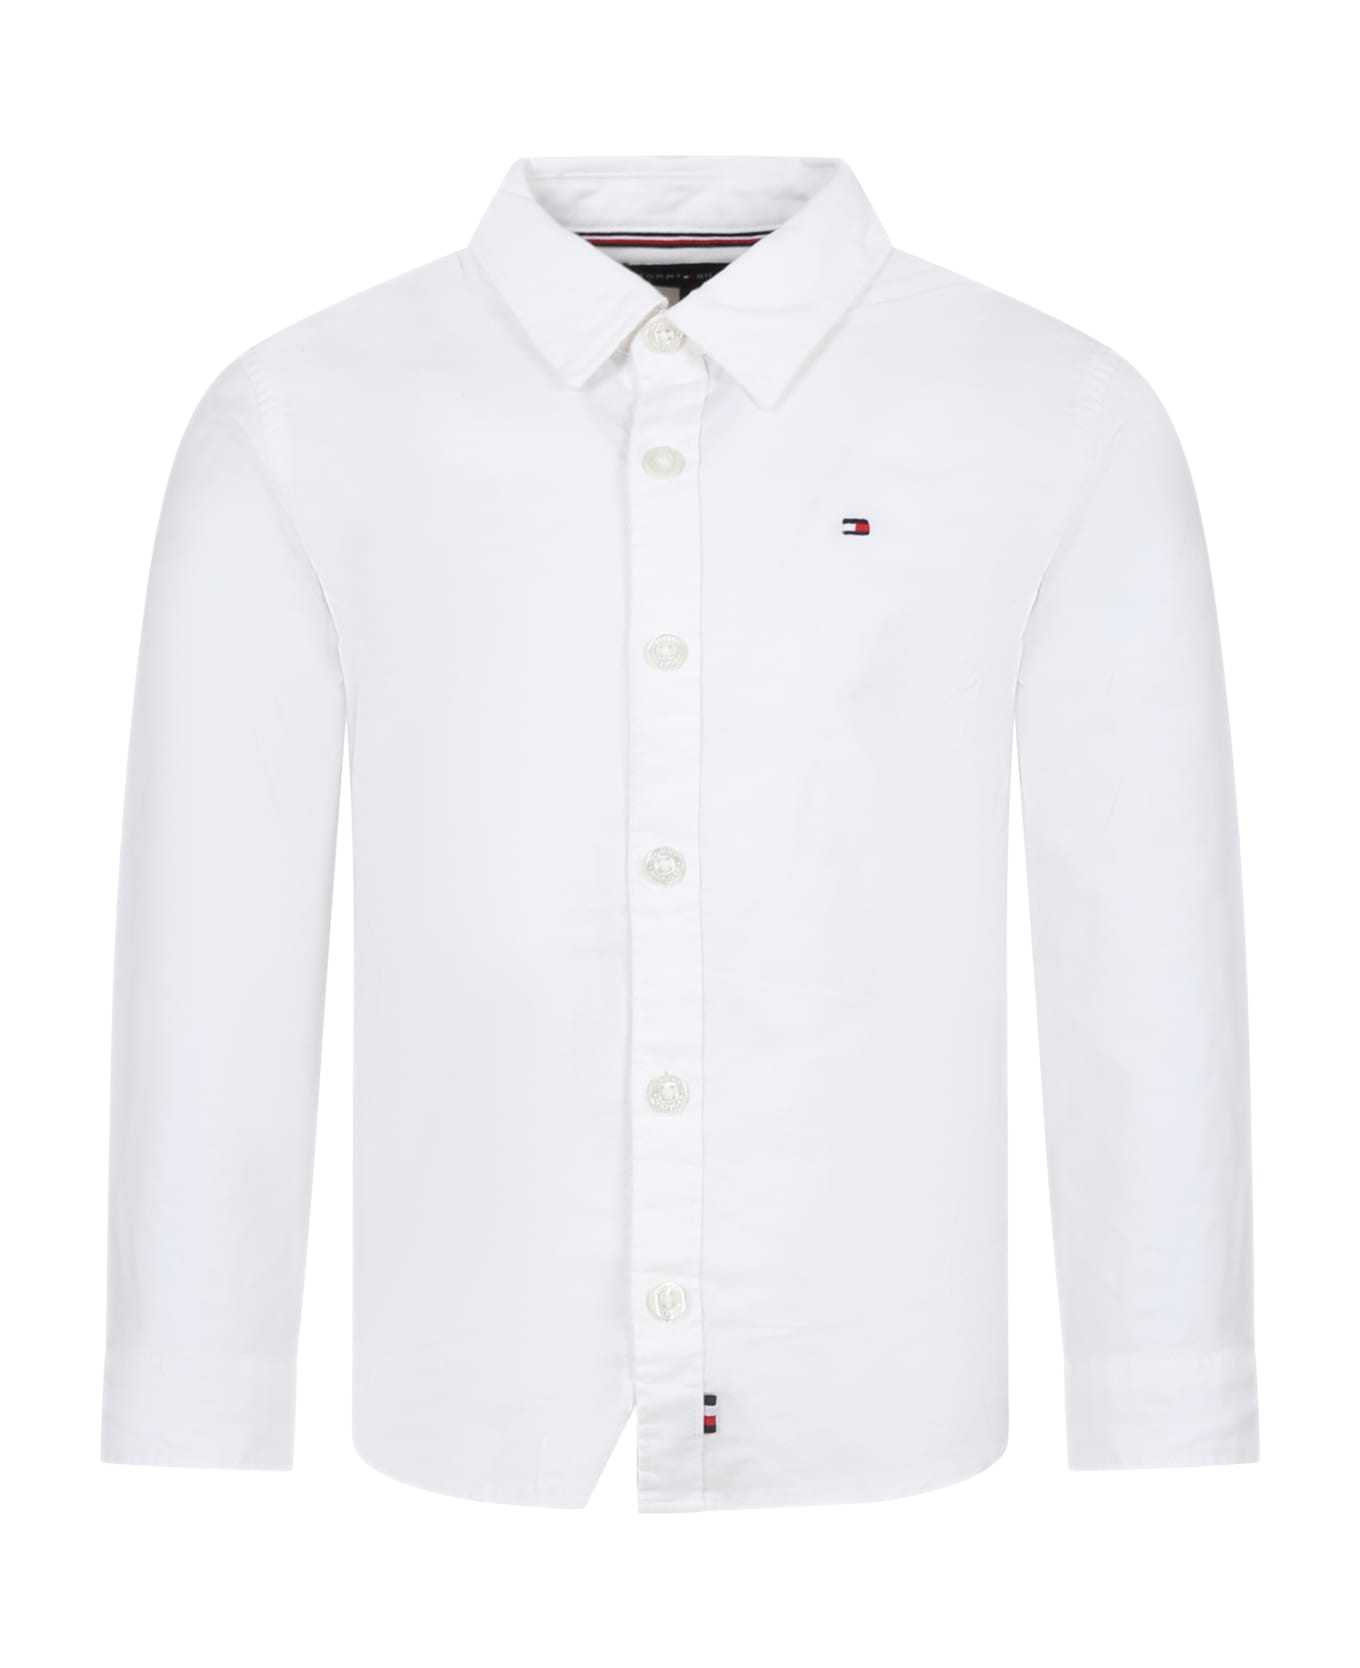 Tommy Hilfiger White Shirt For Boy With Logo - White